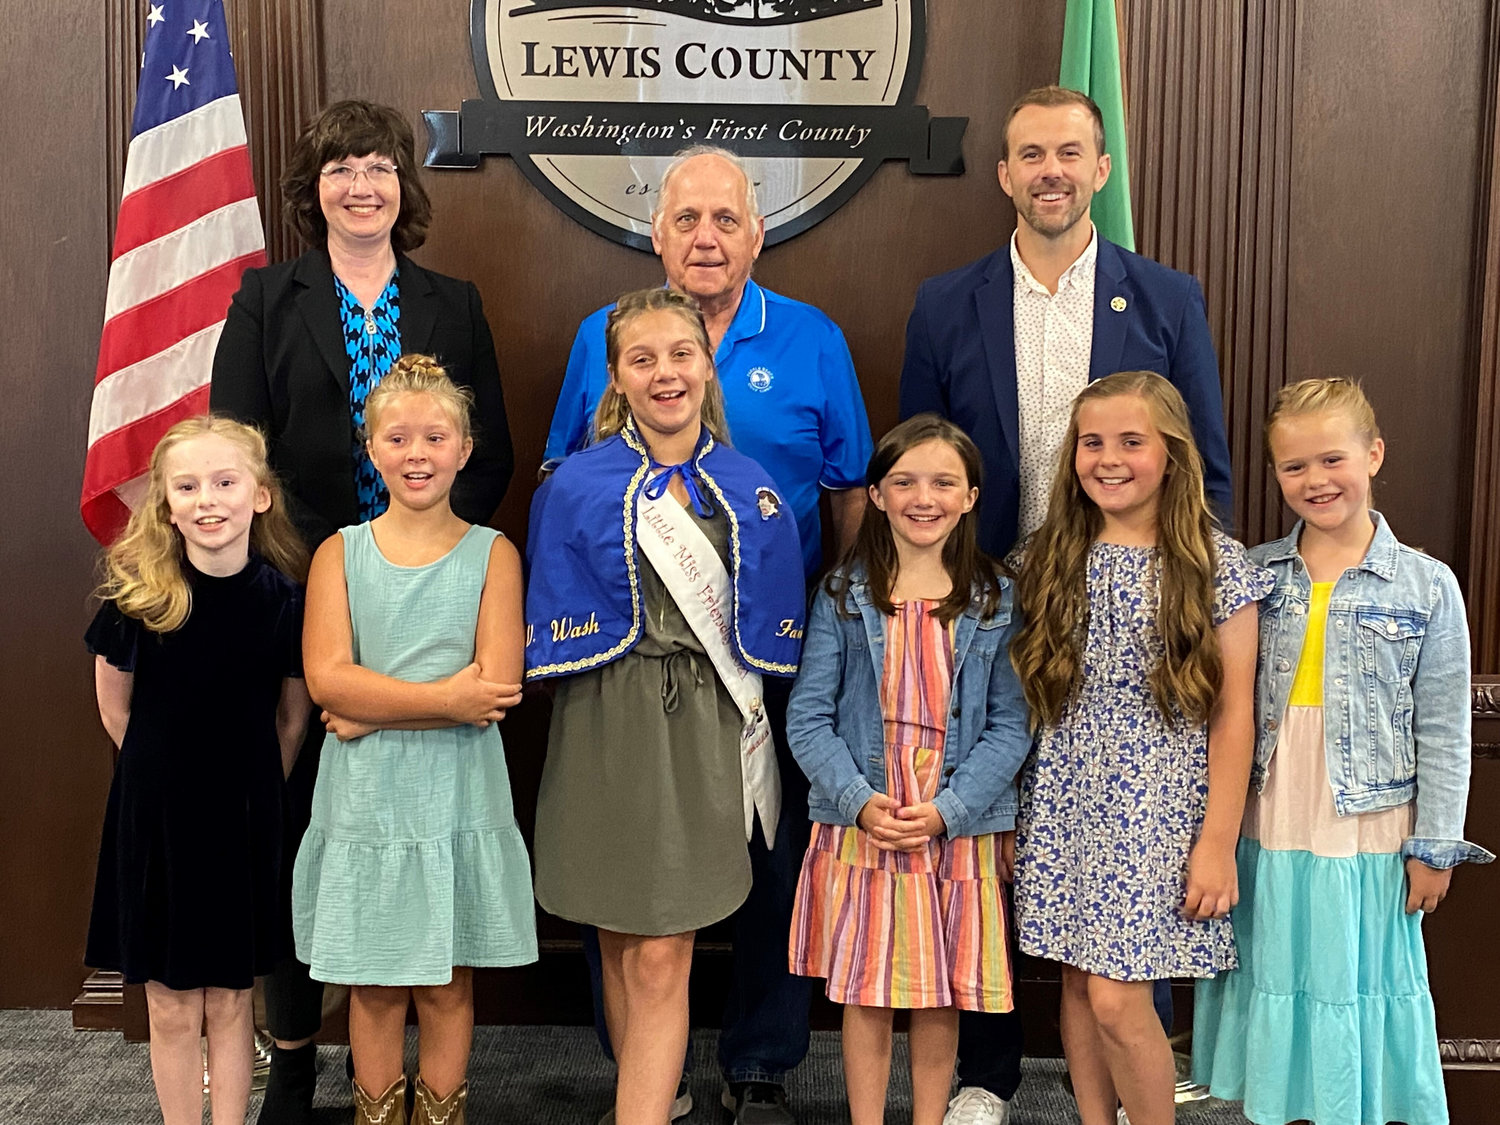 Little Miss Friendly MaKayla Maynard and finalists Ella Hughes, Finley Swope, Emma Britton, Gracelyn Briggs and Jaxsyn Lowrey pose for a photo with Lewis County commissioners Sean Swope, Lee Grose and Lindsey Pollock this week.